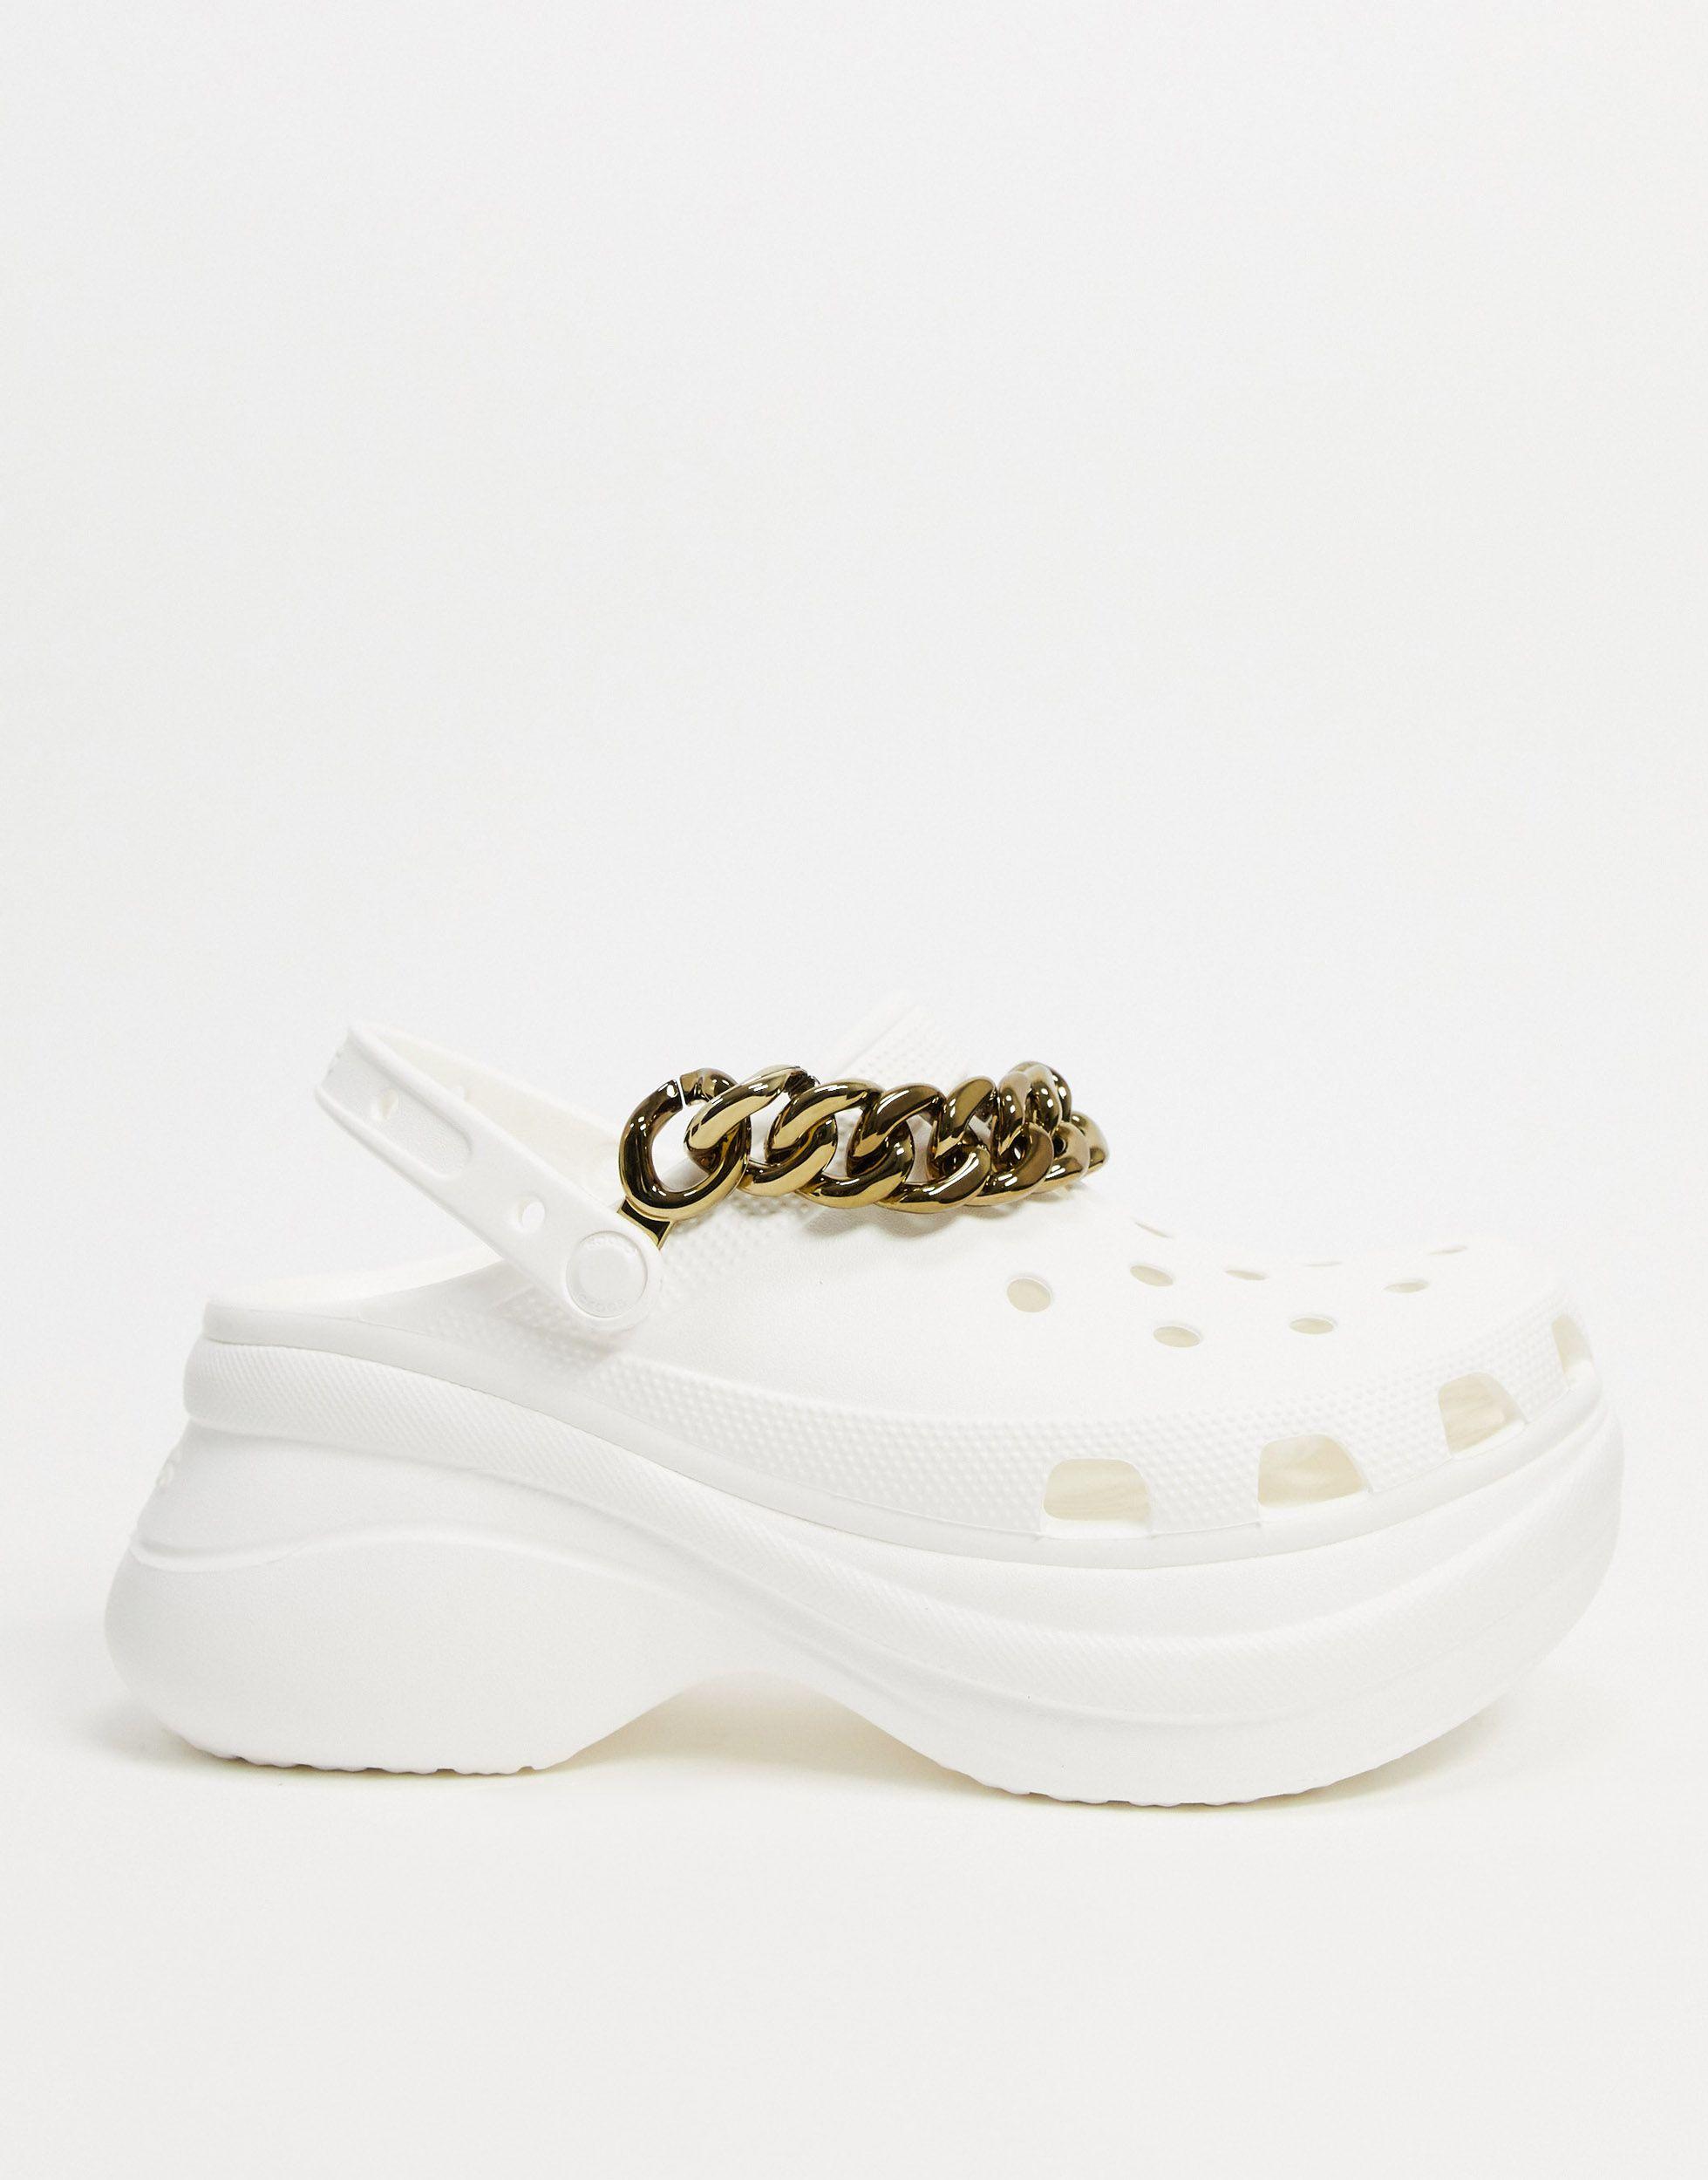 A pair of Crocs and a trendy chain that can be easily attached for